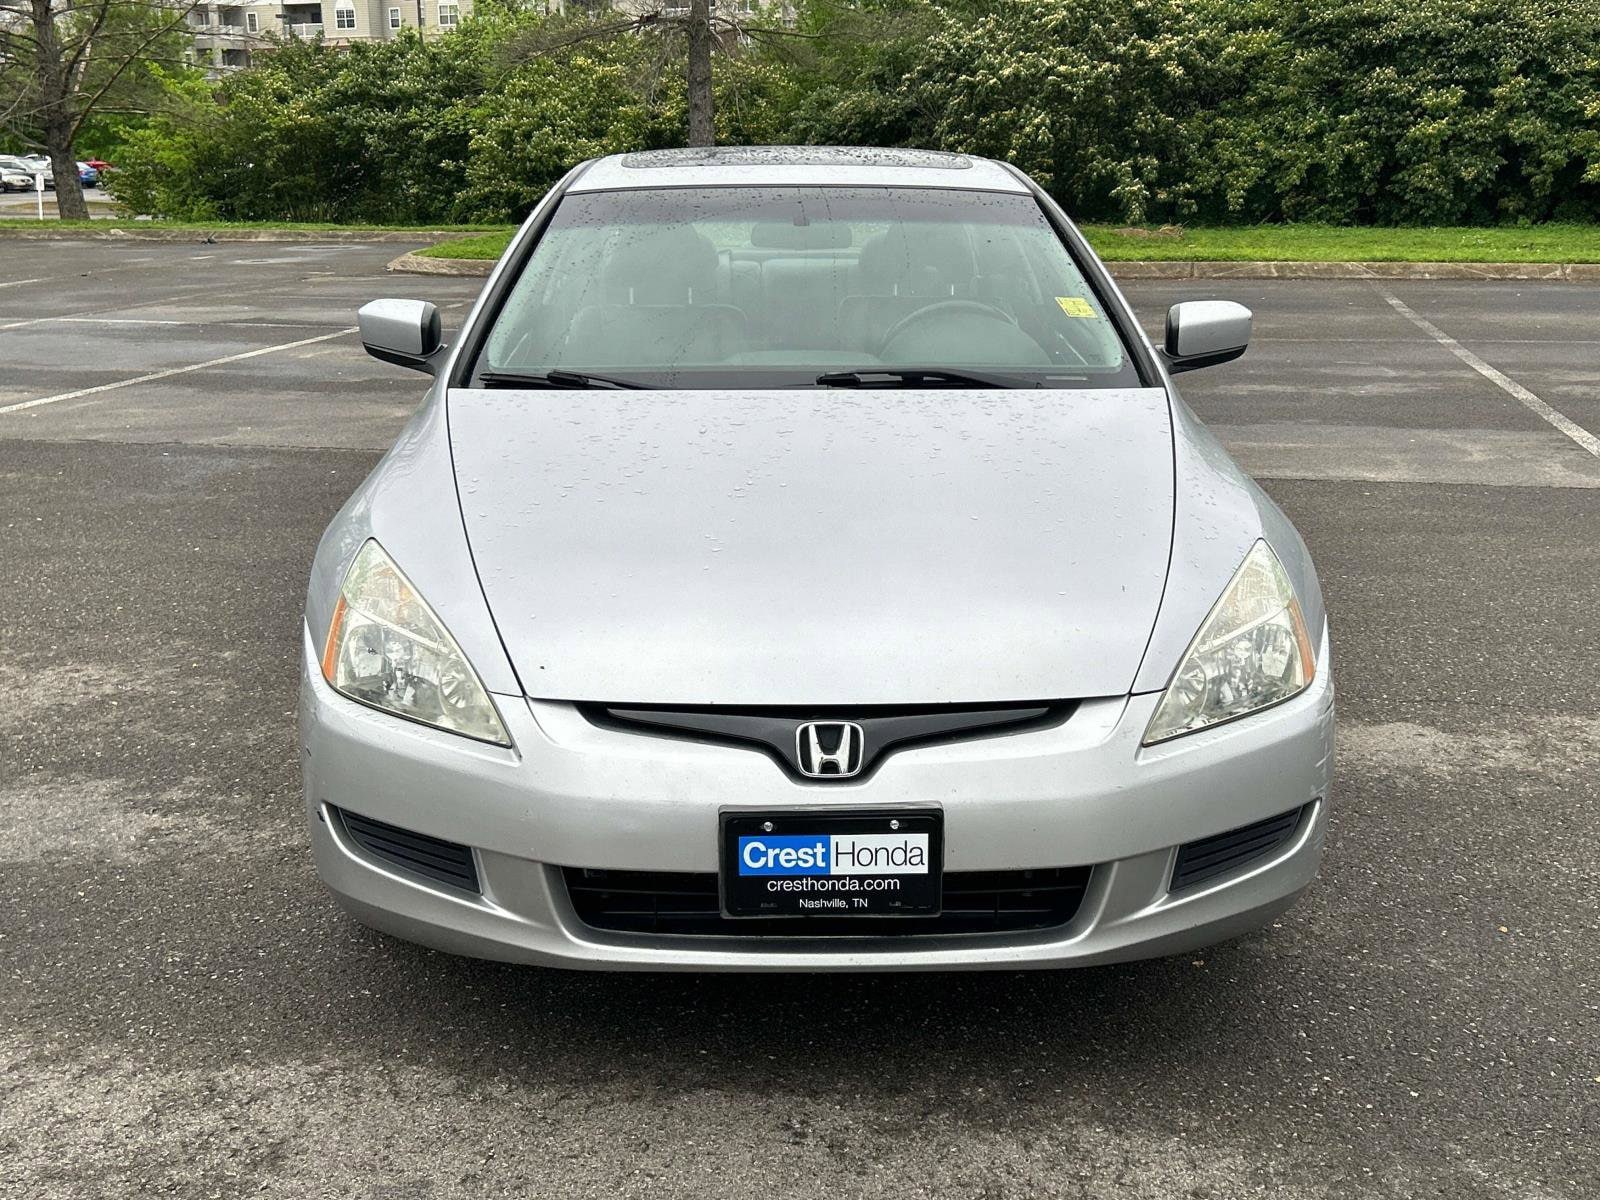 Used 2003 Honda Accord EX with VIN 1HGCM72673A005644 for sale in Nashville, TN